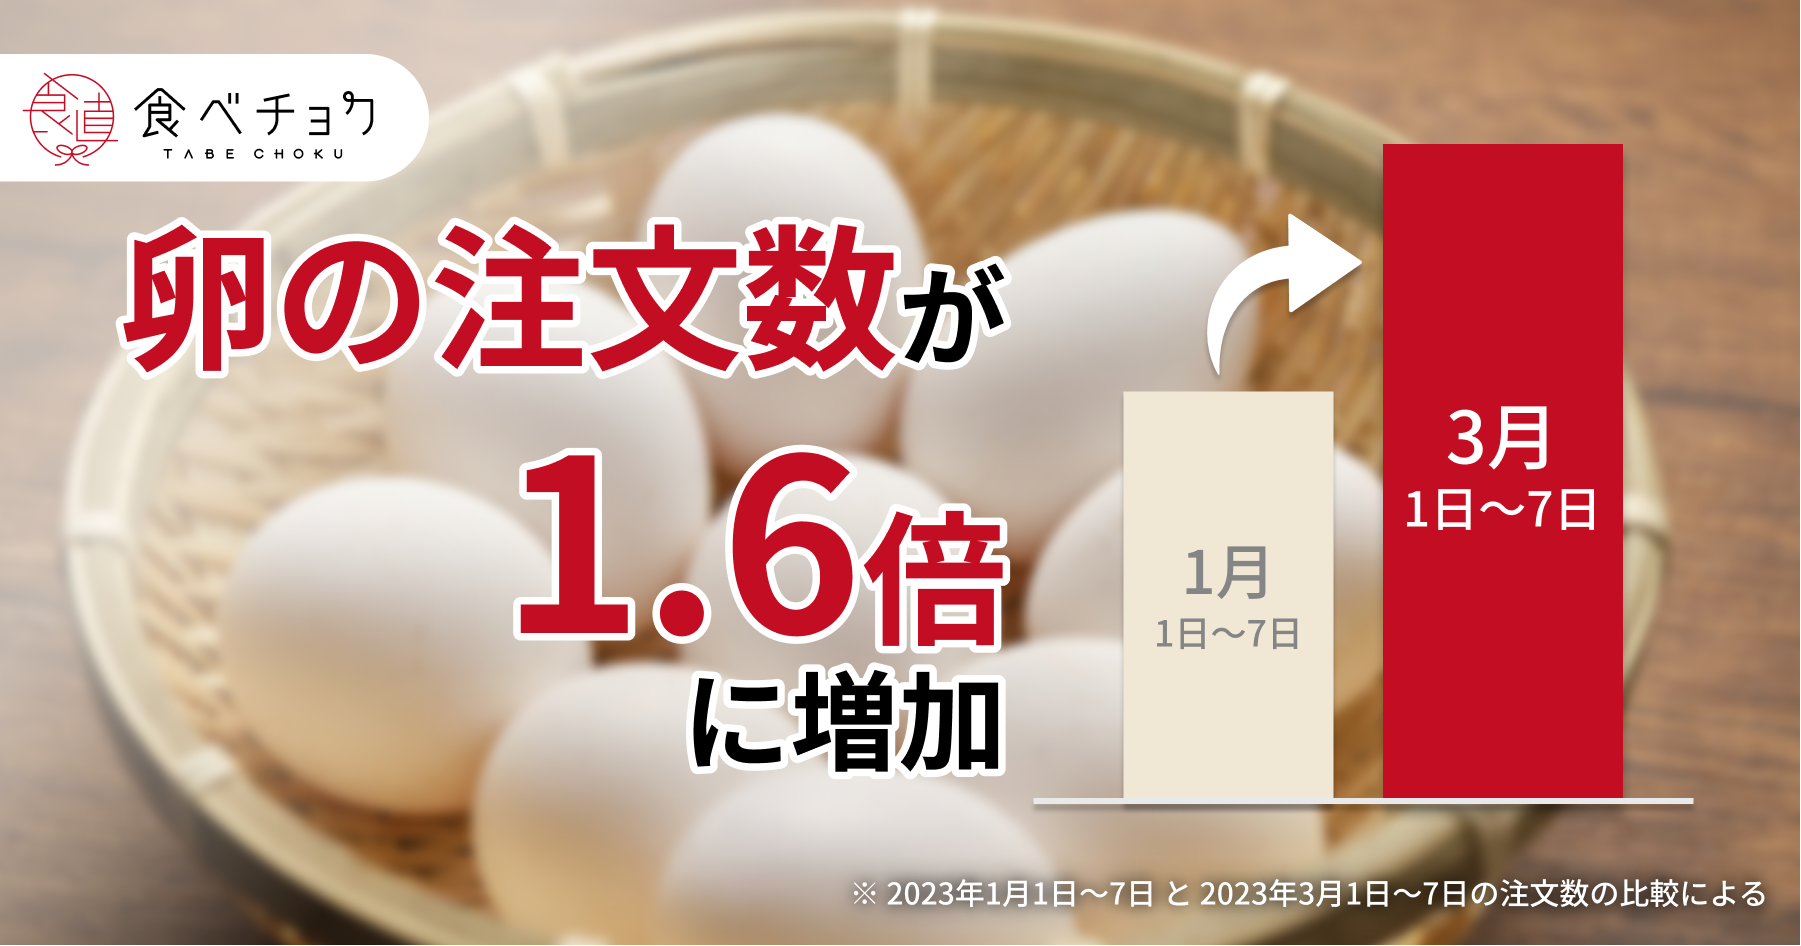 🍴 Eat choku ｜ Orders for eggs surged 2 times in 1.6 months due to soaring prices!Introducing the charm of eggs directly from the farm Recently, "price increase due to soaring feed prices" and "bird flu ...